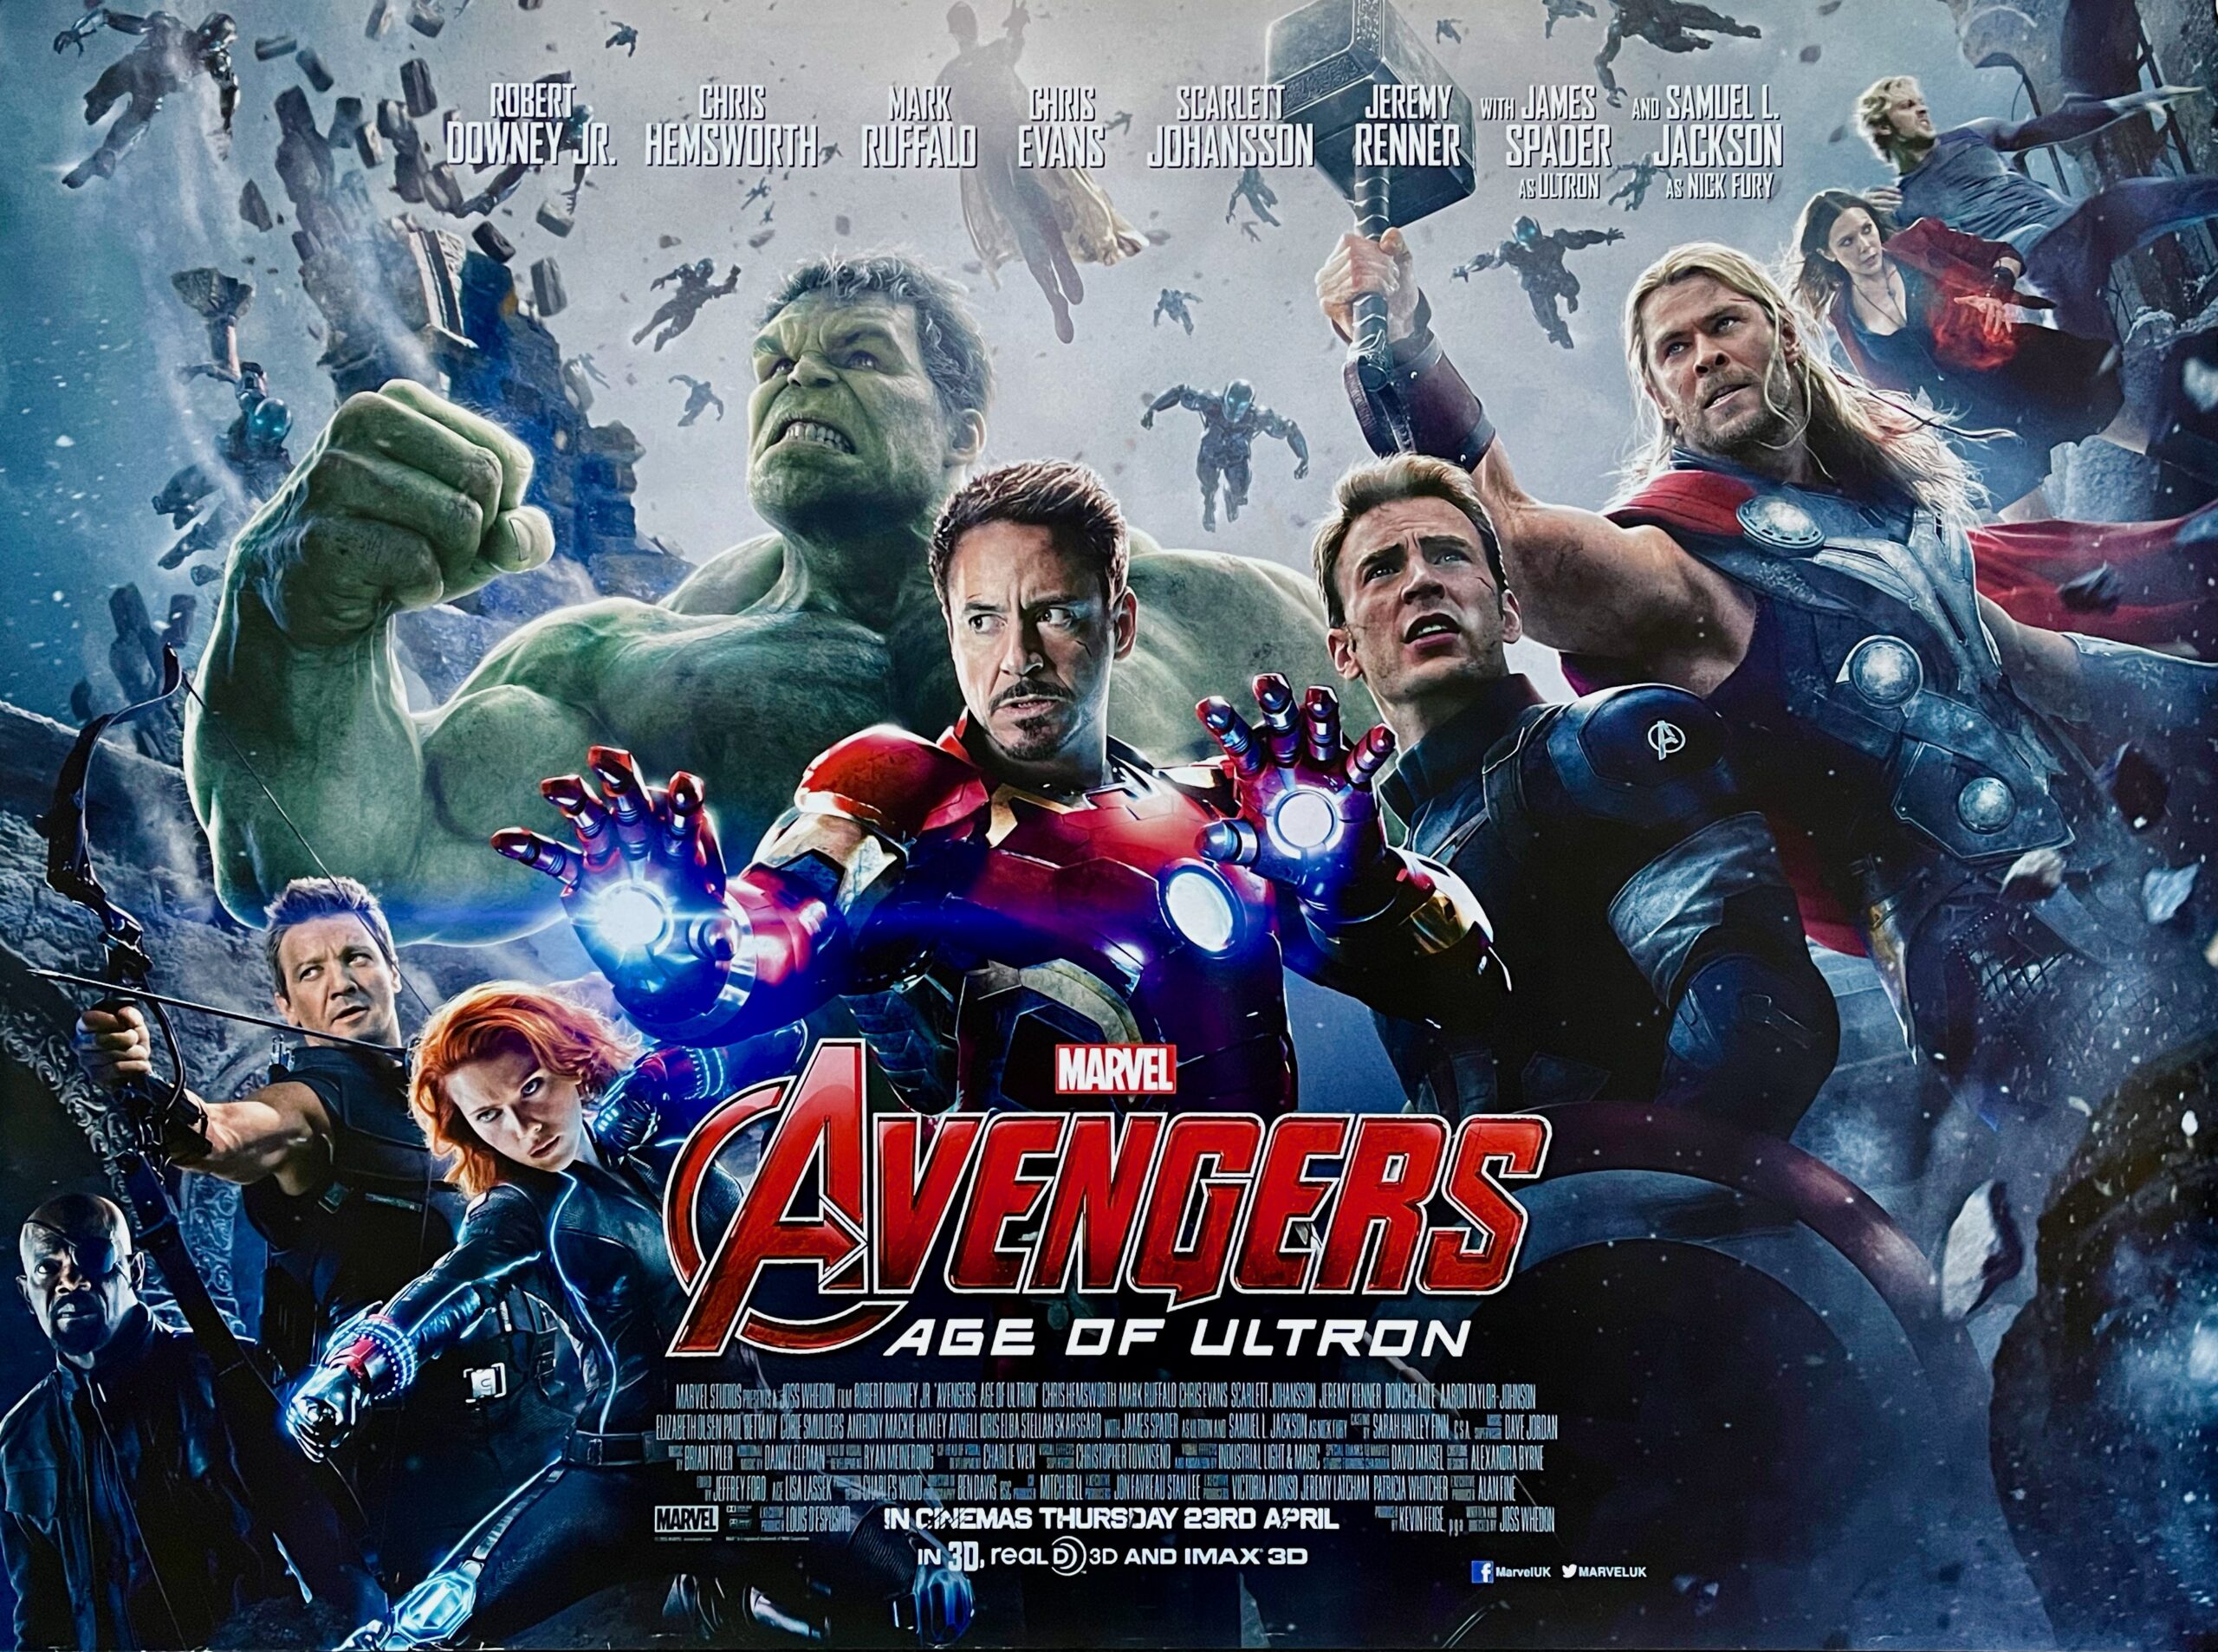 Avengers: Age of Ultron instaling